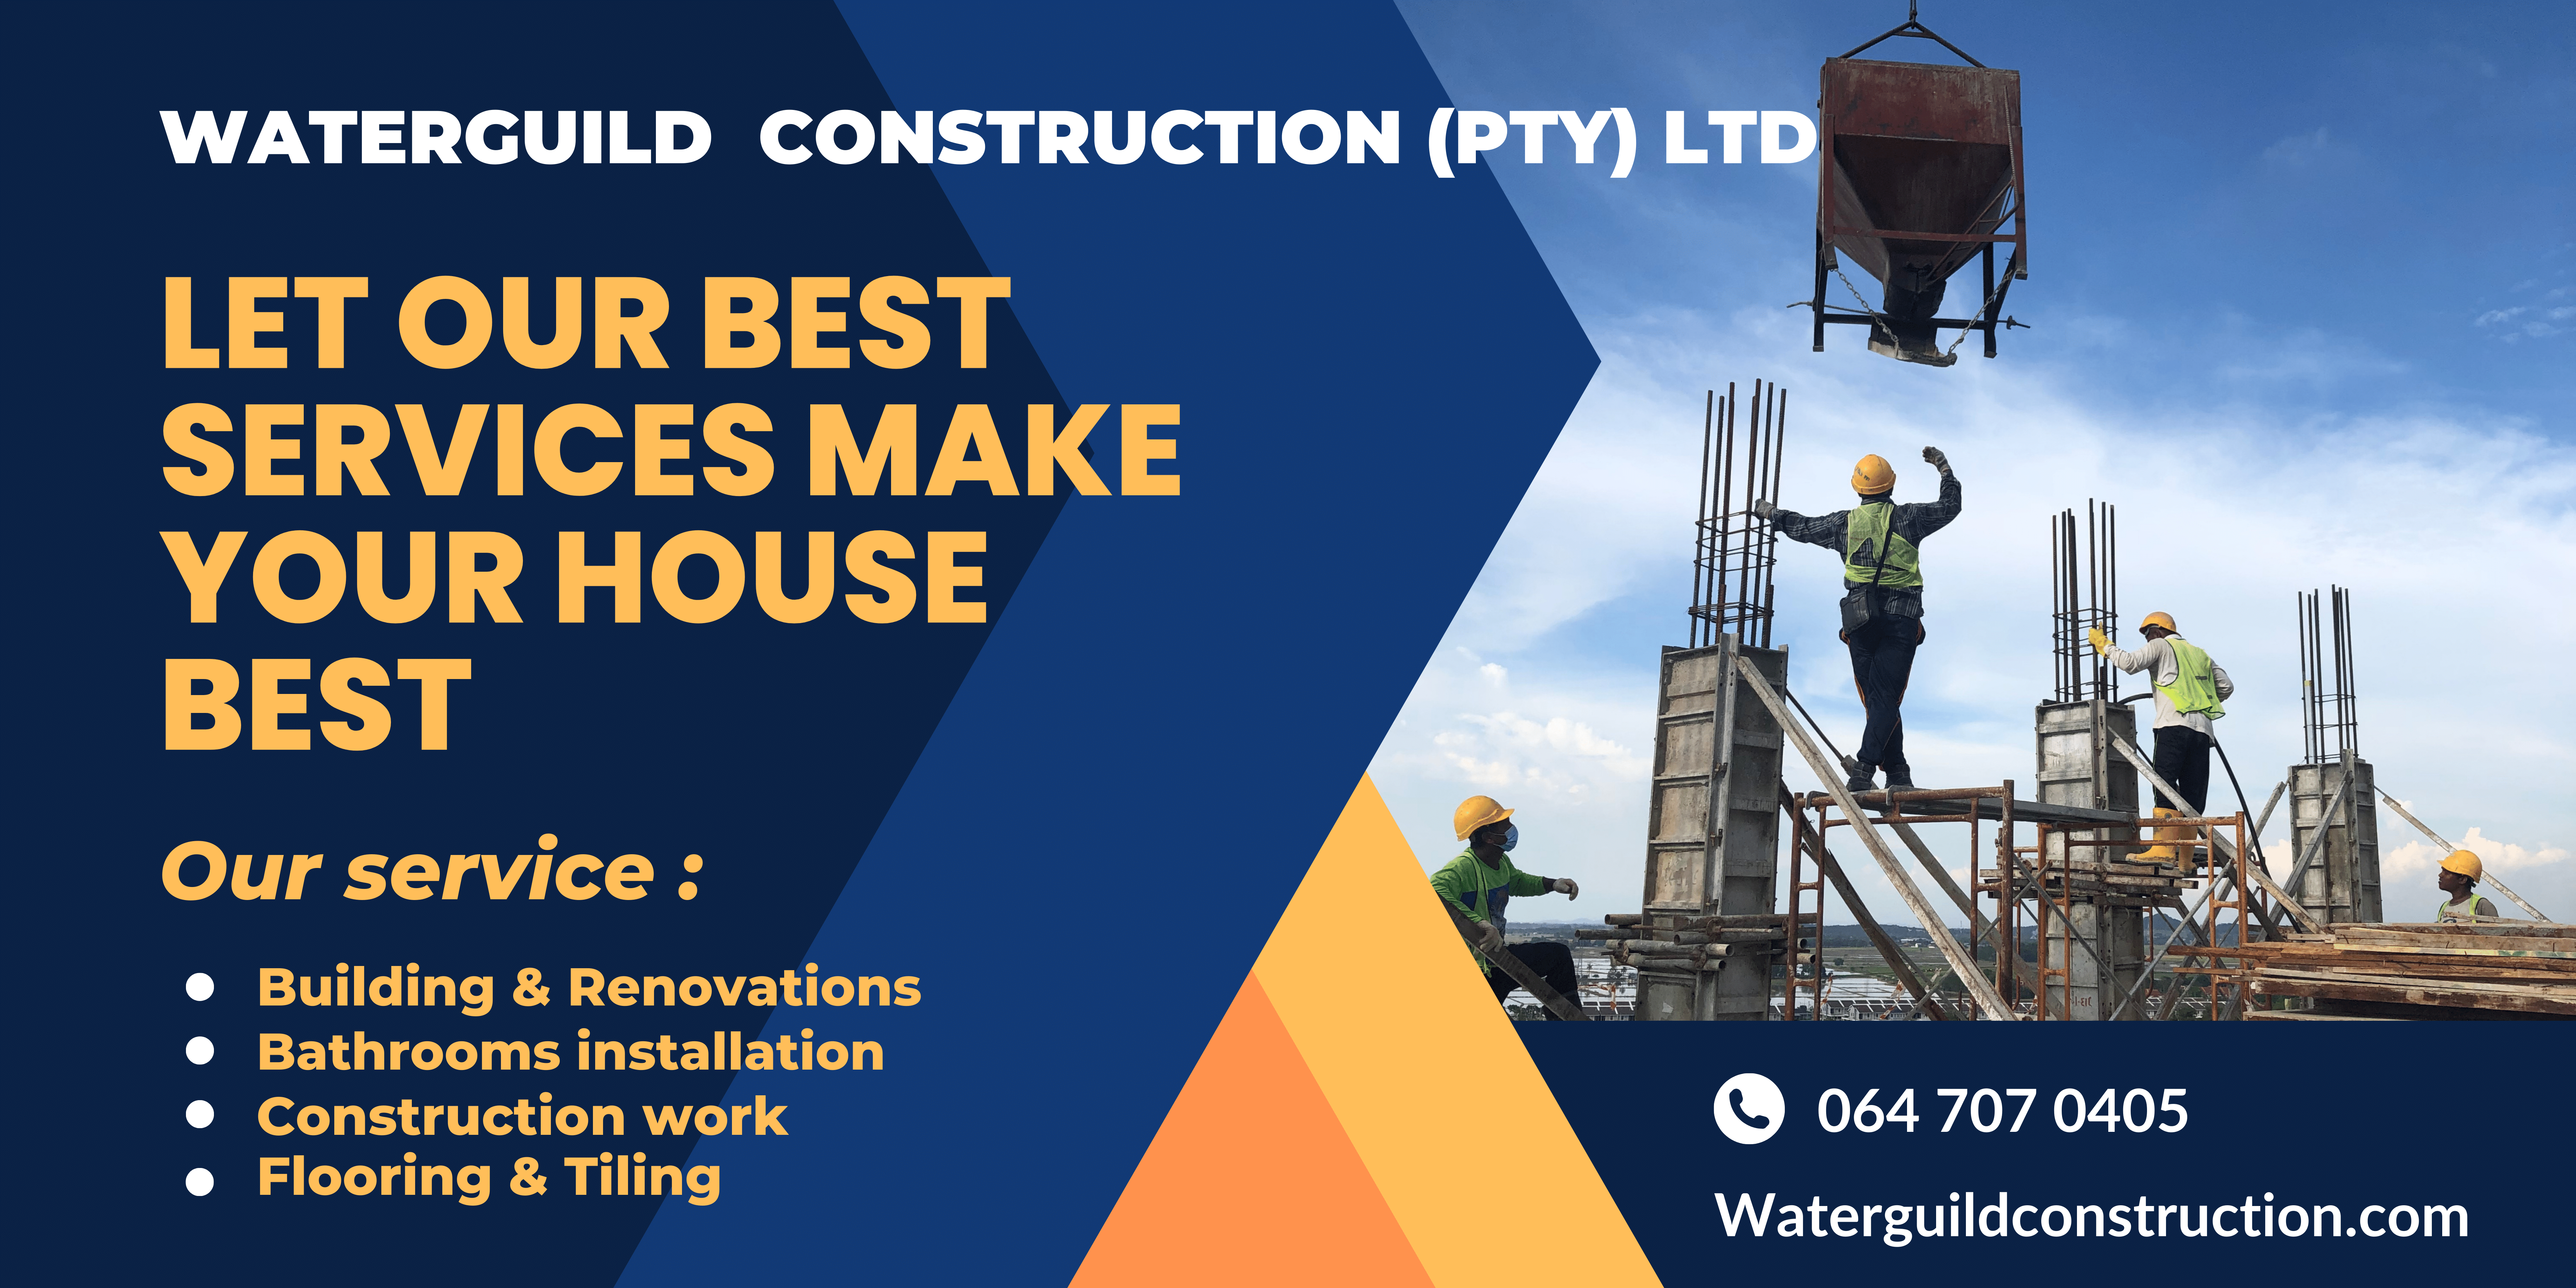 SE: ie gs |
k ey BH
5 of be

LET OUR BEST
SERVICES MAKE
YOUR HOUSE

BEST

Our service:

Building & Renovations
Bathrooms installation
Construction work
SLY Id RET]

     
  

RYH

Woaterguildconstruction.com